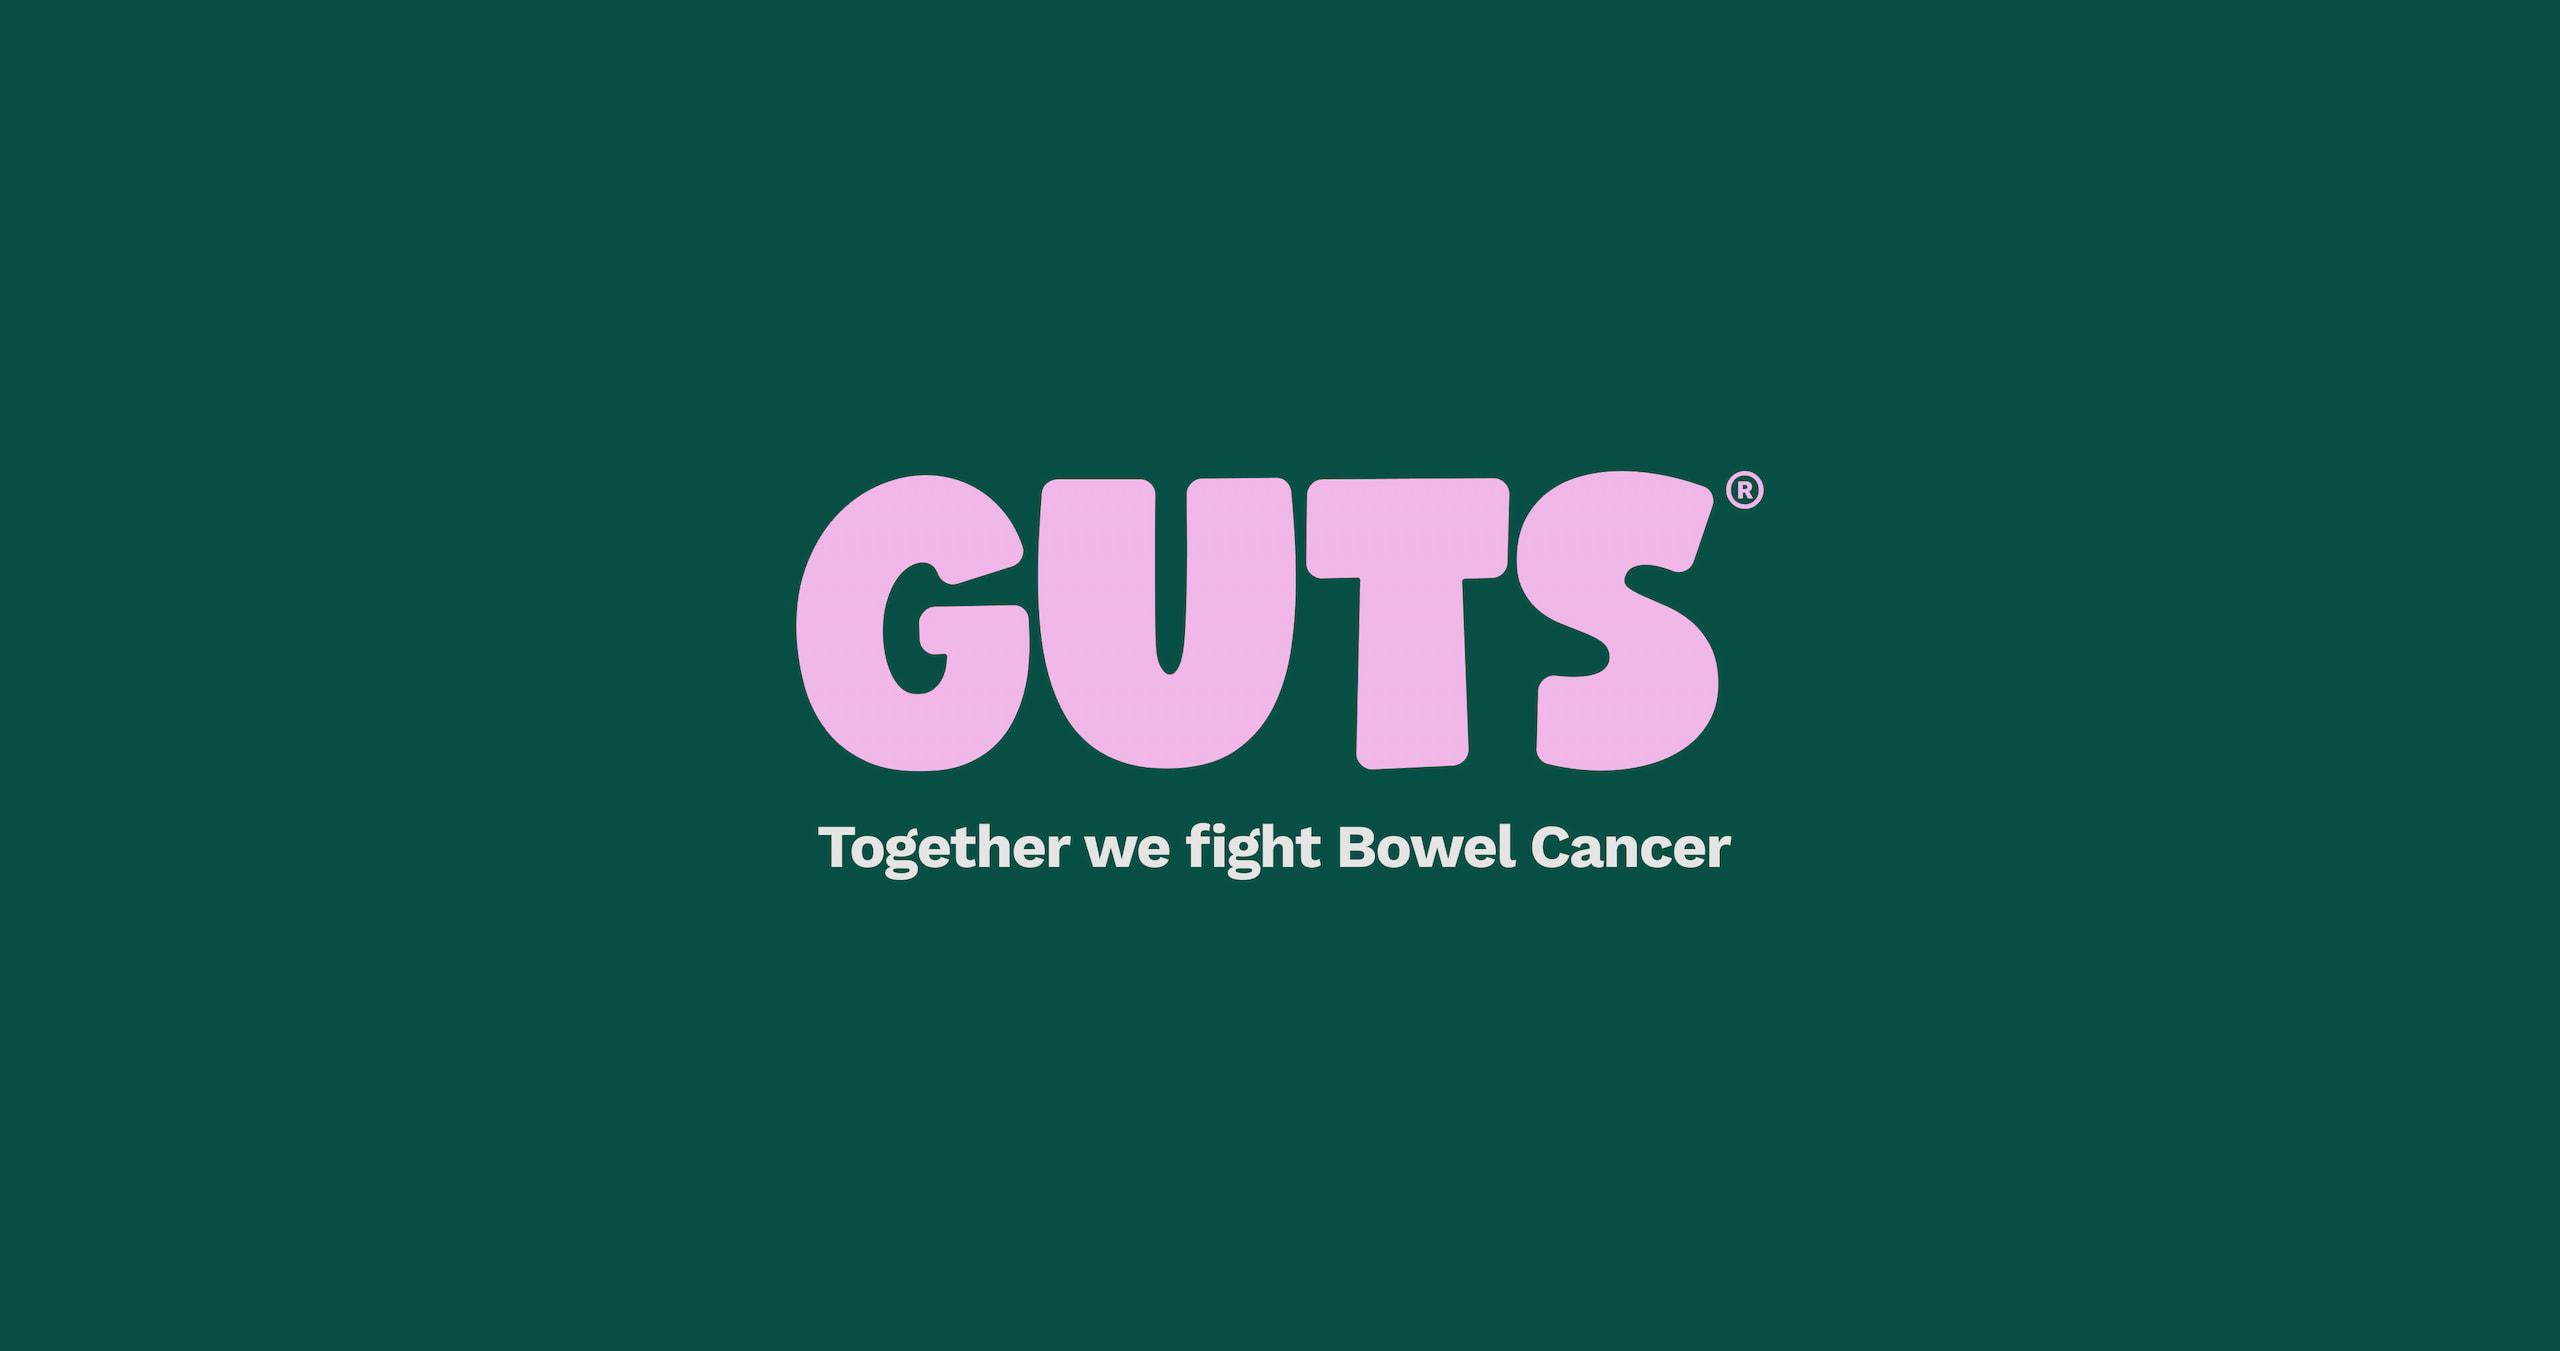 Pink logo design for GUTS Bowel Cancer Charity on dark green backgorund with tagline that says Together we fight bowel cancer.